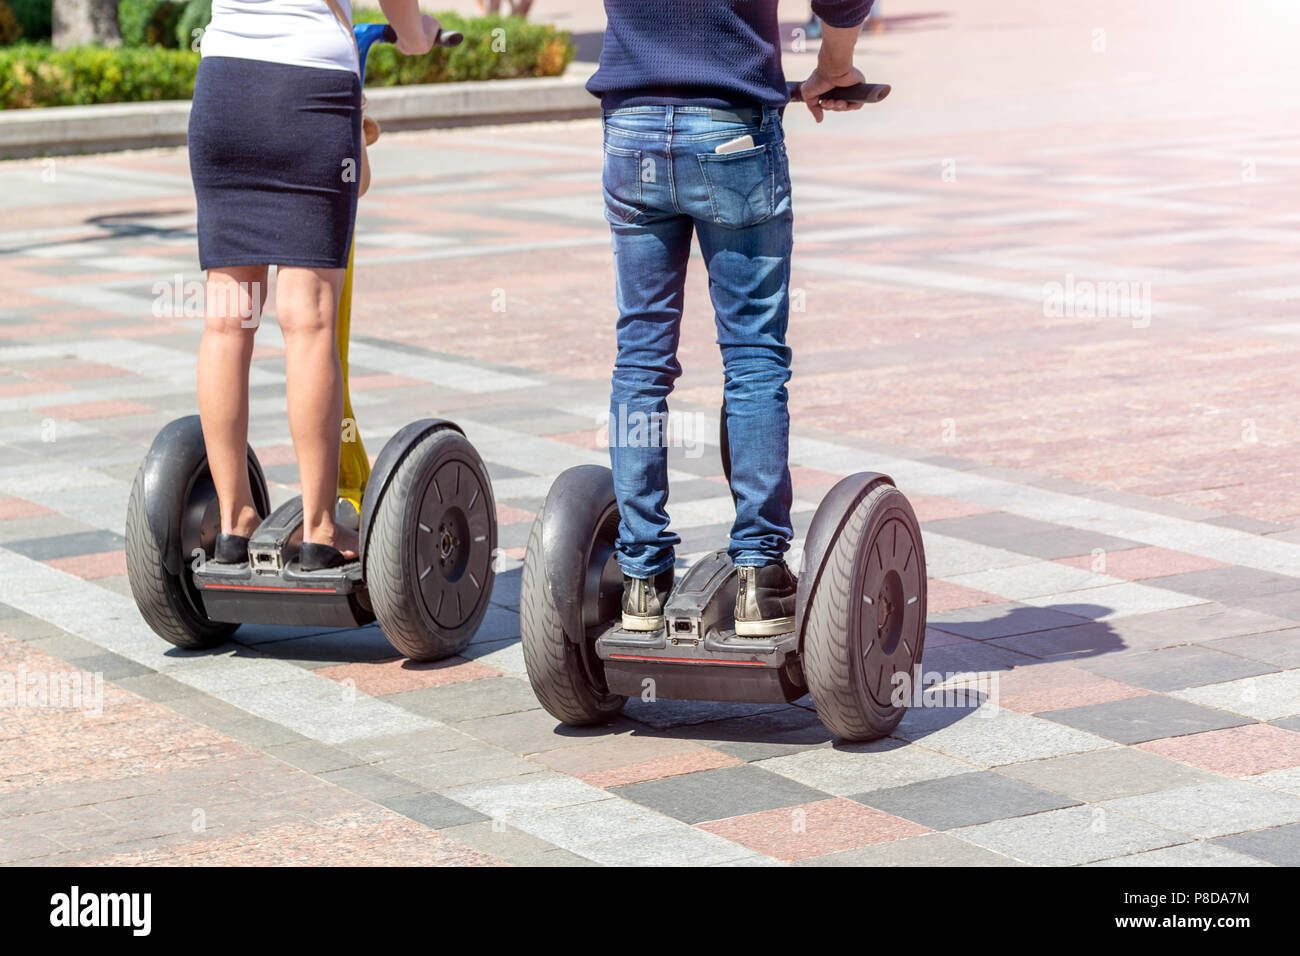 Couple in casual clothes riding modern gyro scooter hover board at city street on bright sunny day. Electric eco future urban transport gadget. Stock Photo